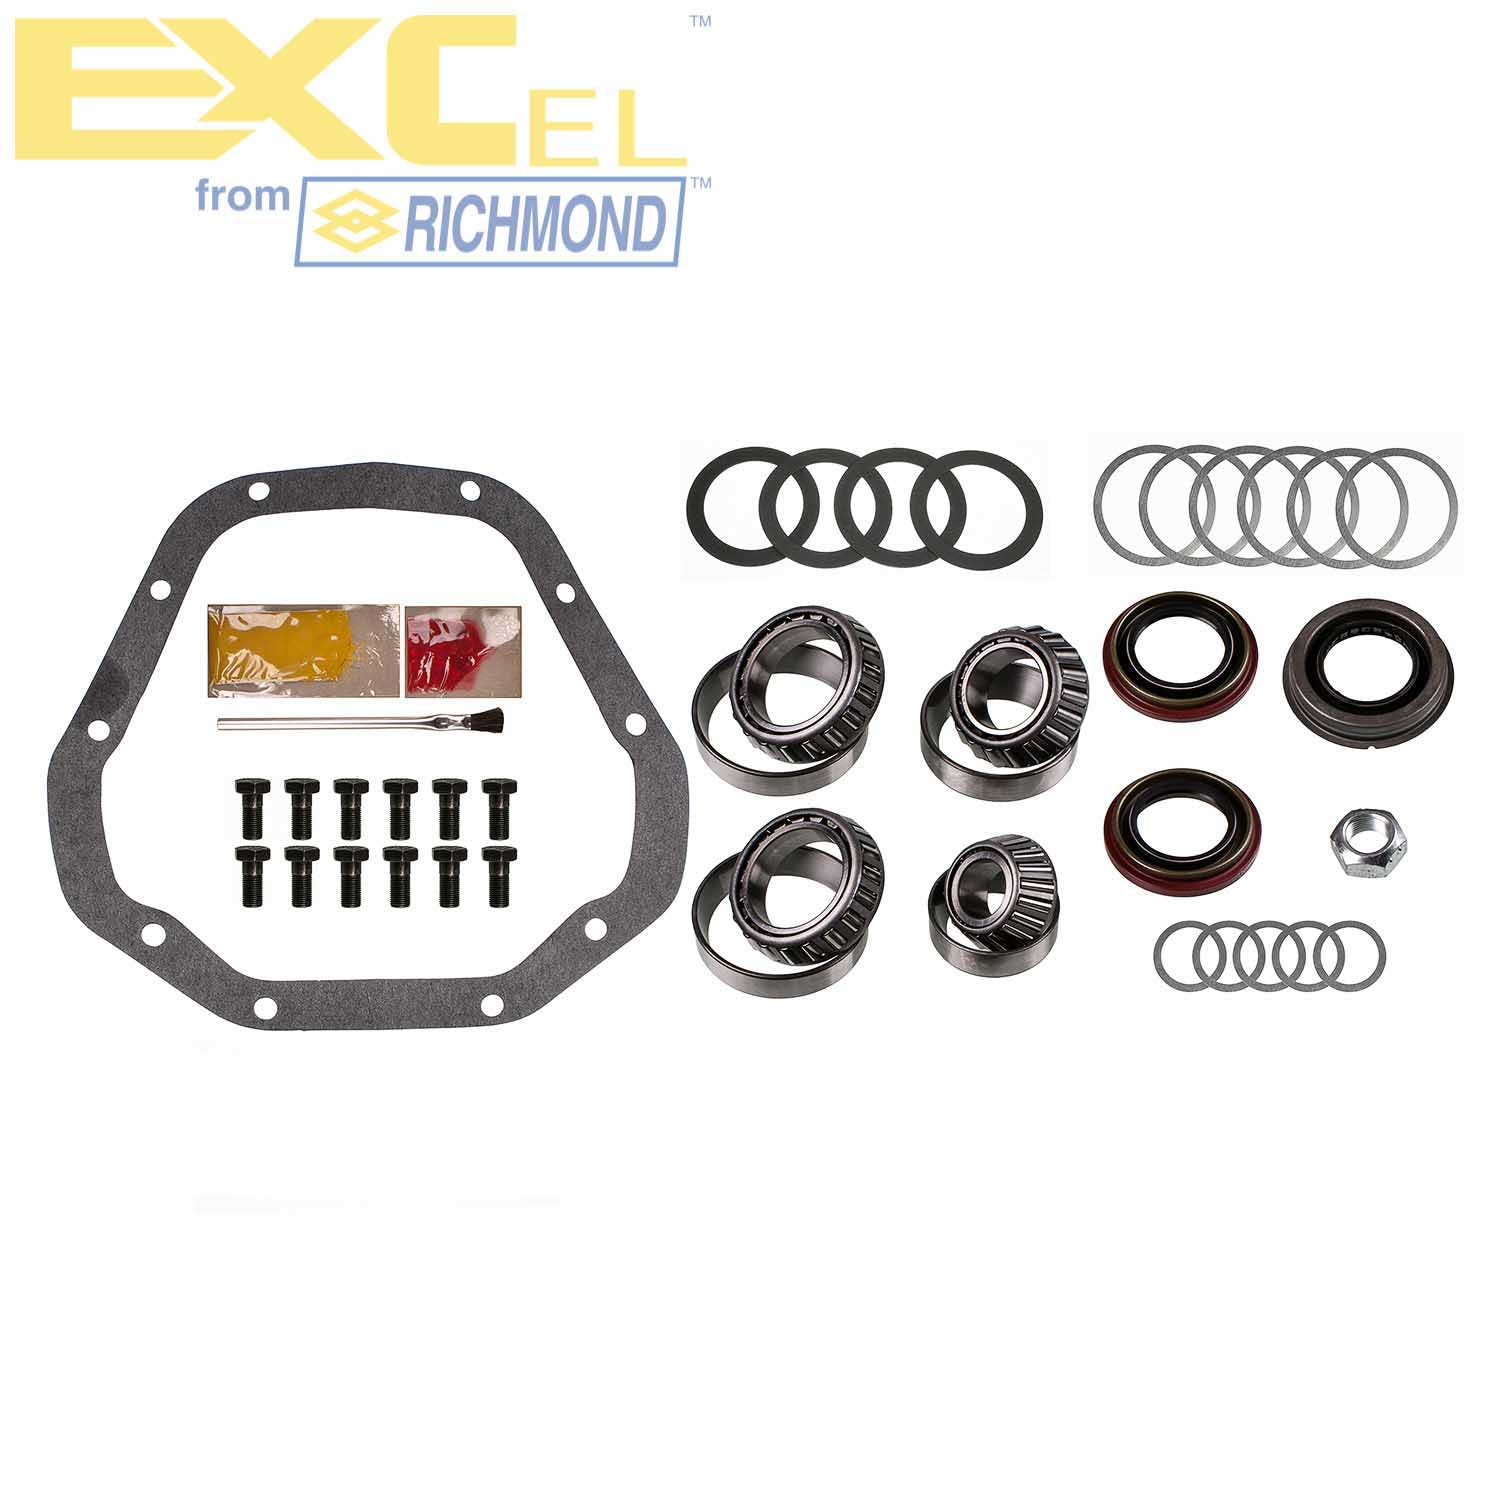 Excel XL-1080-1 Differential Bearing Kit